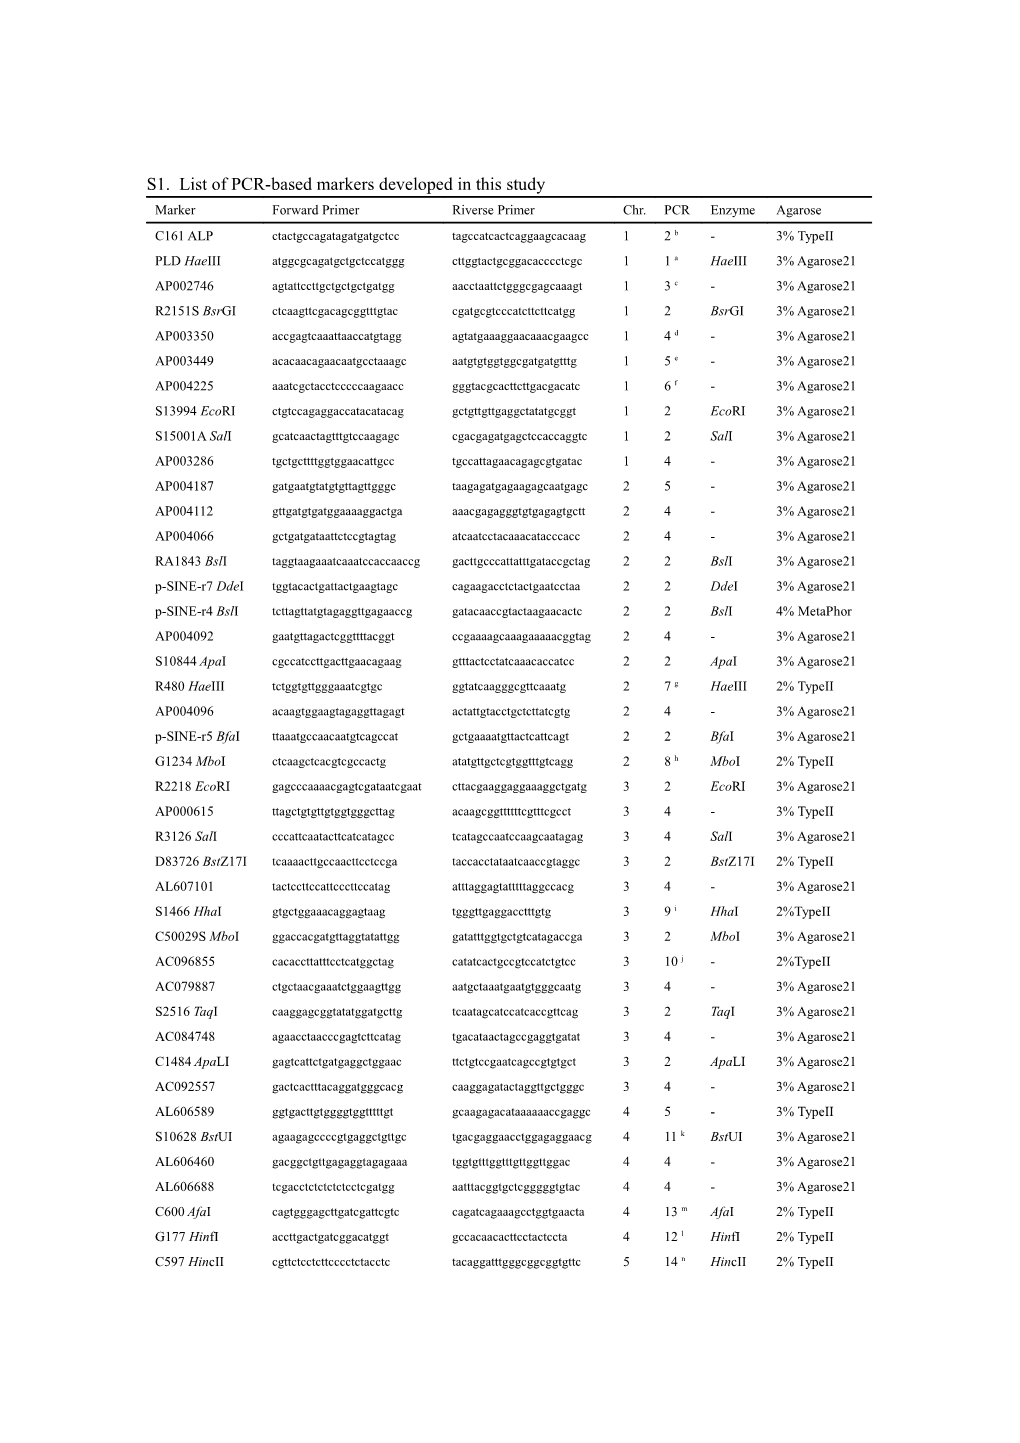 S1. List of PCR-Based Markers Developed in This Study